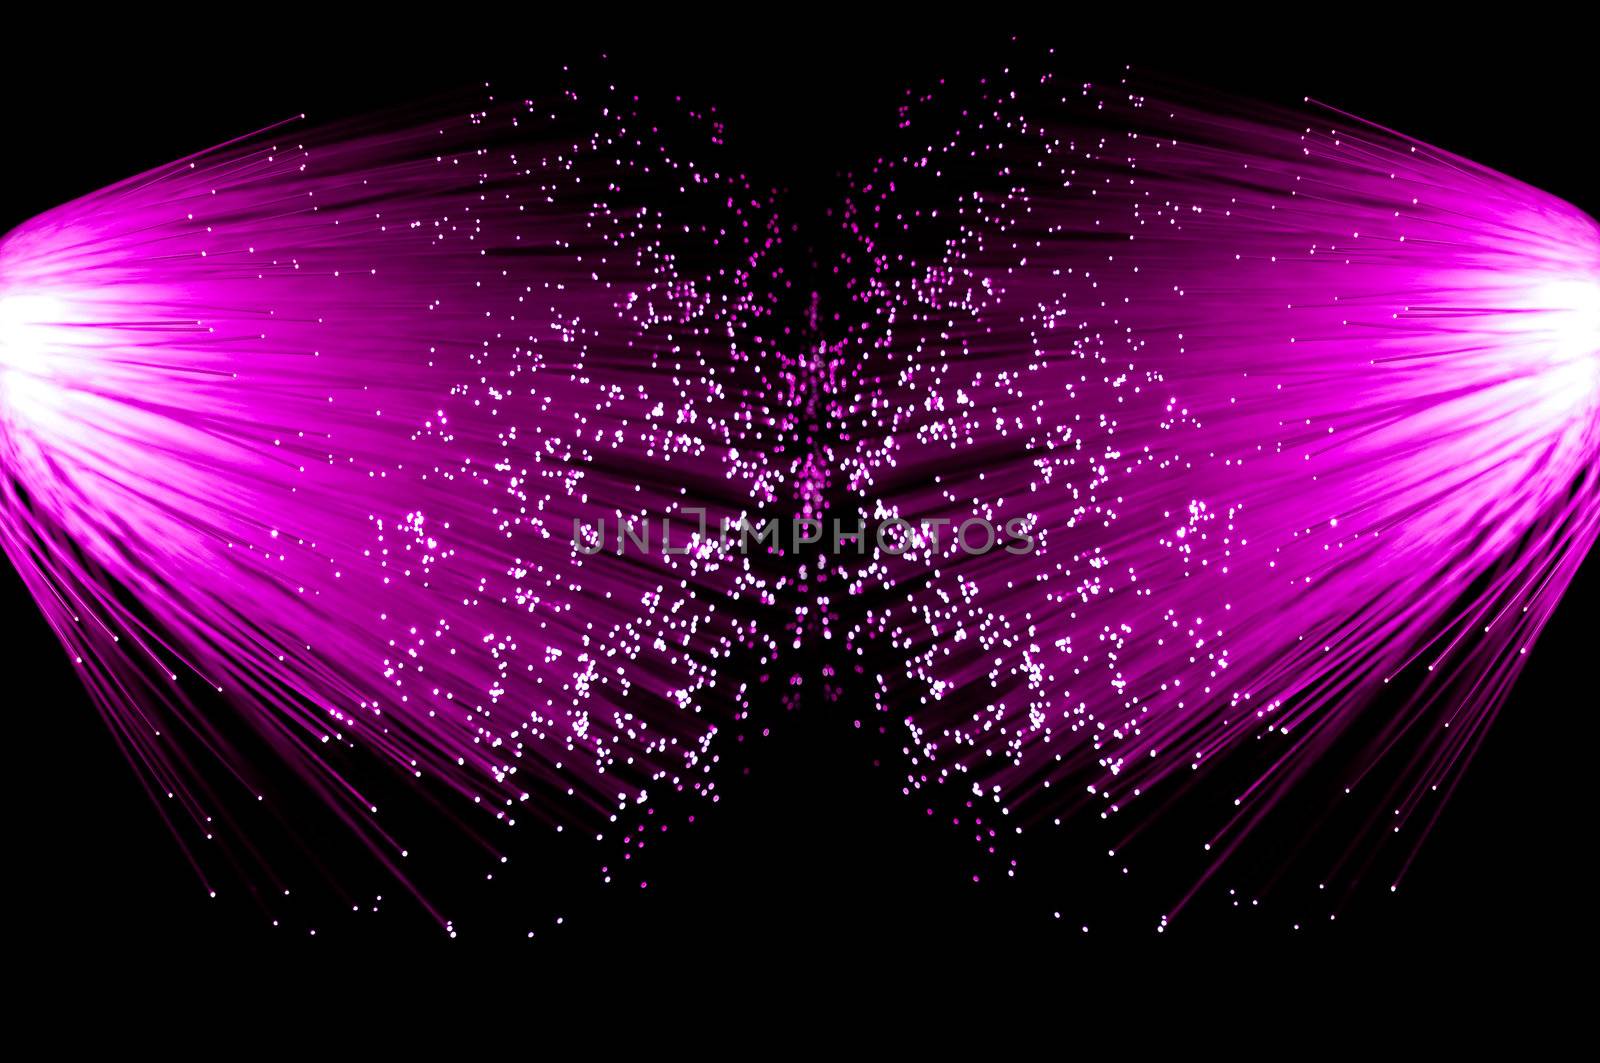 Two illuminated groups of bright pink fibre optic strands emanating from the left and right of the image. Black background.